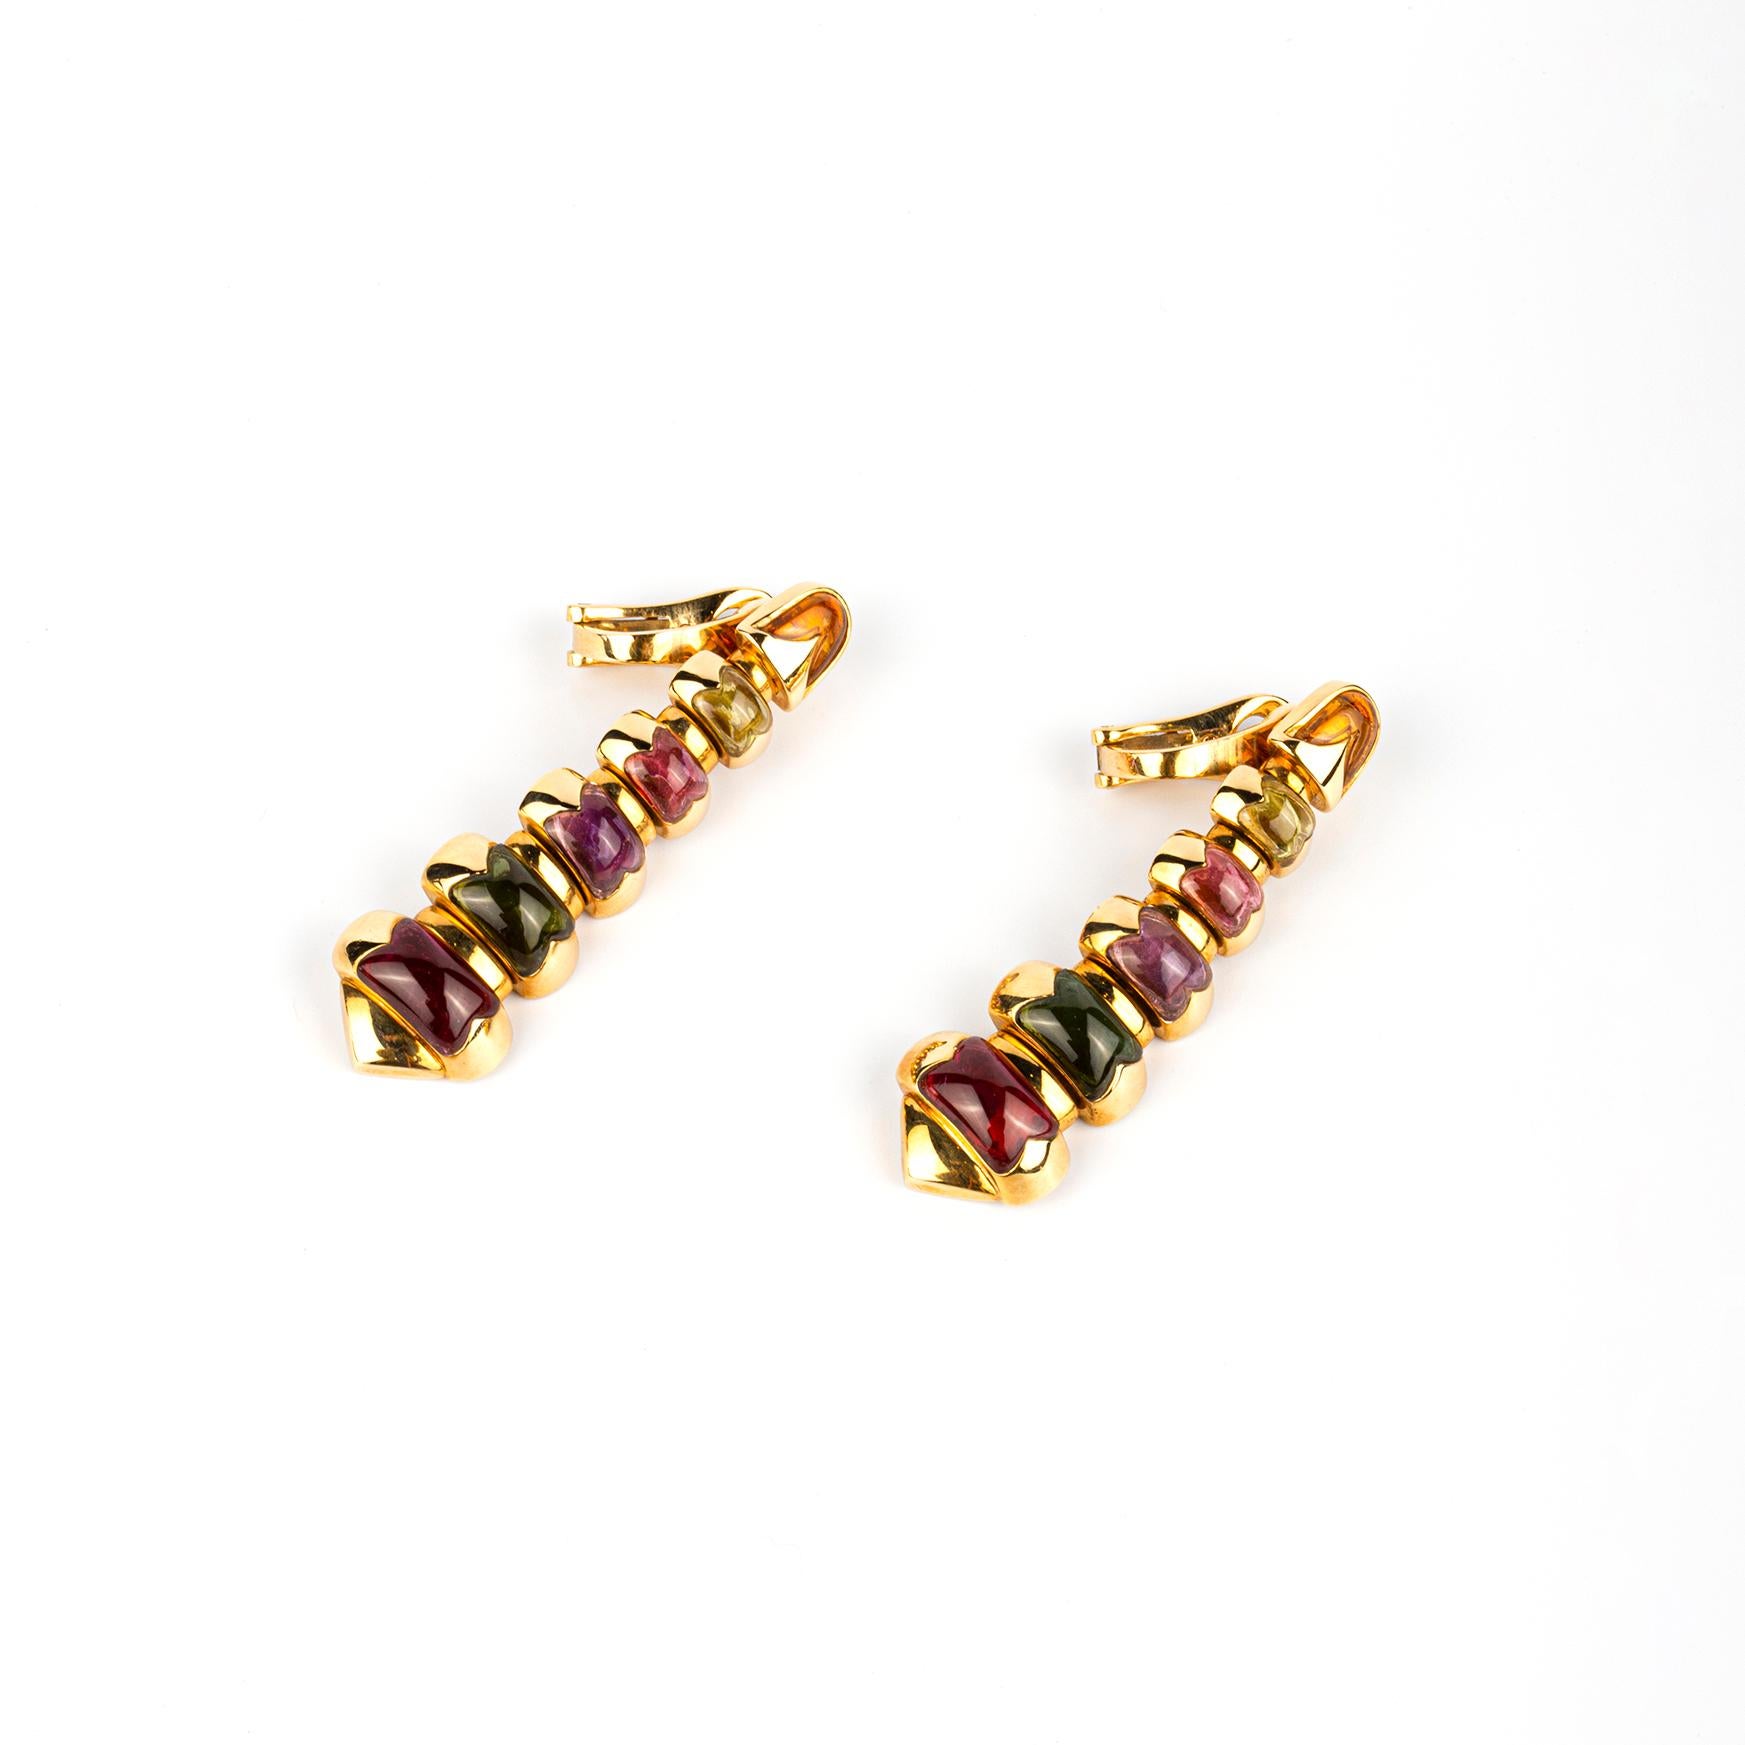 Bulgari Celtaura Style 18k yellow gold drop earrings with multi-colored gemstones in rose and green shades. Made in Italy, circa 1980.